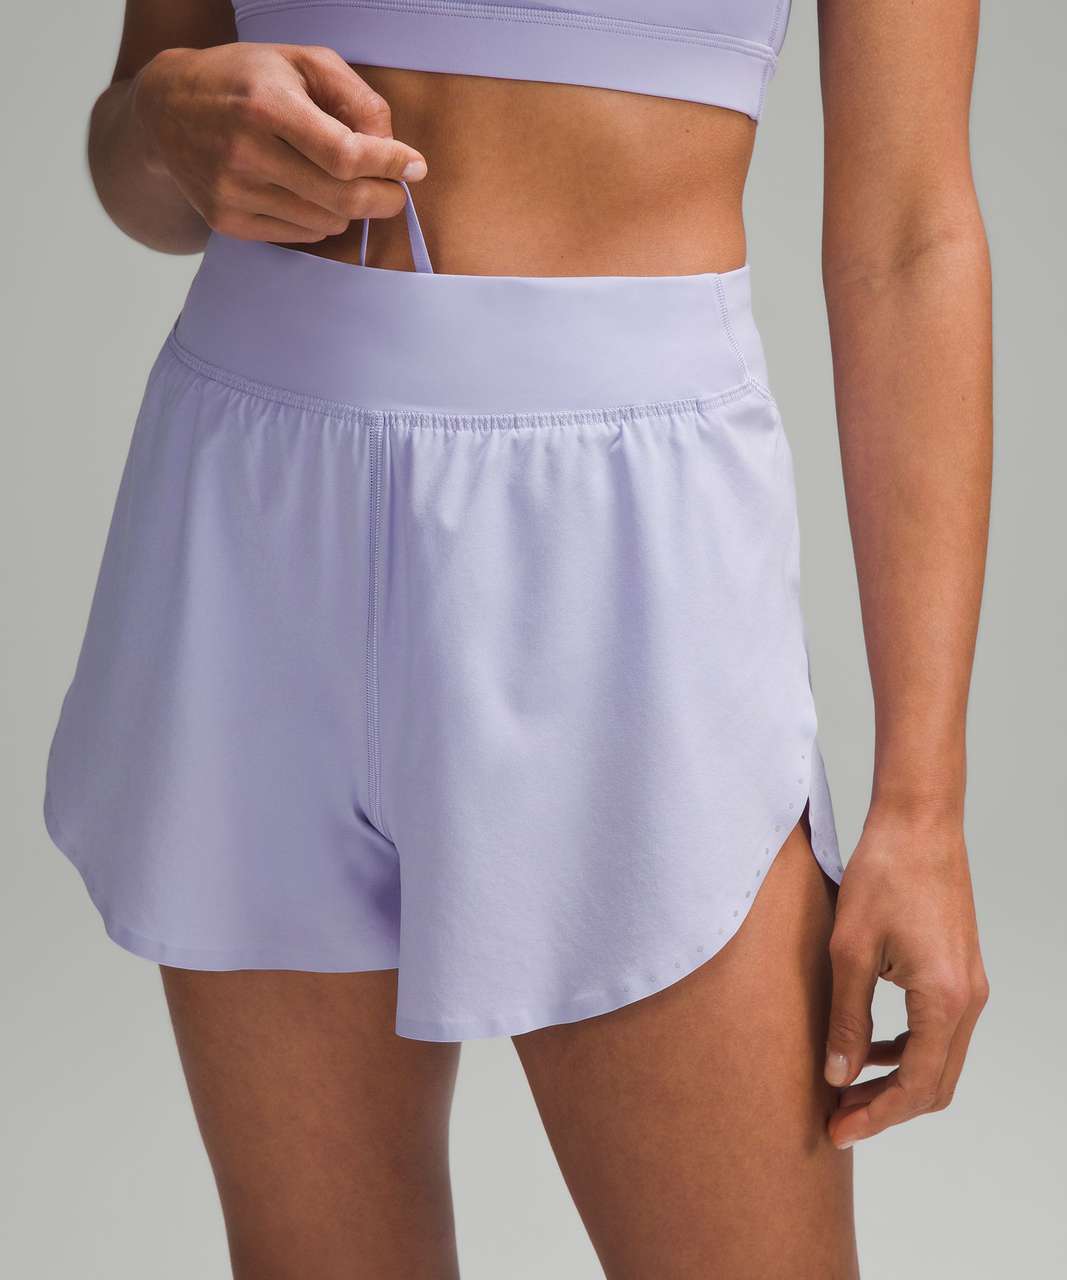 Lululemon Fast and Free Reflective High-Rise Classic-Fit Short 3" - Lilac Smoke